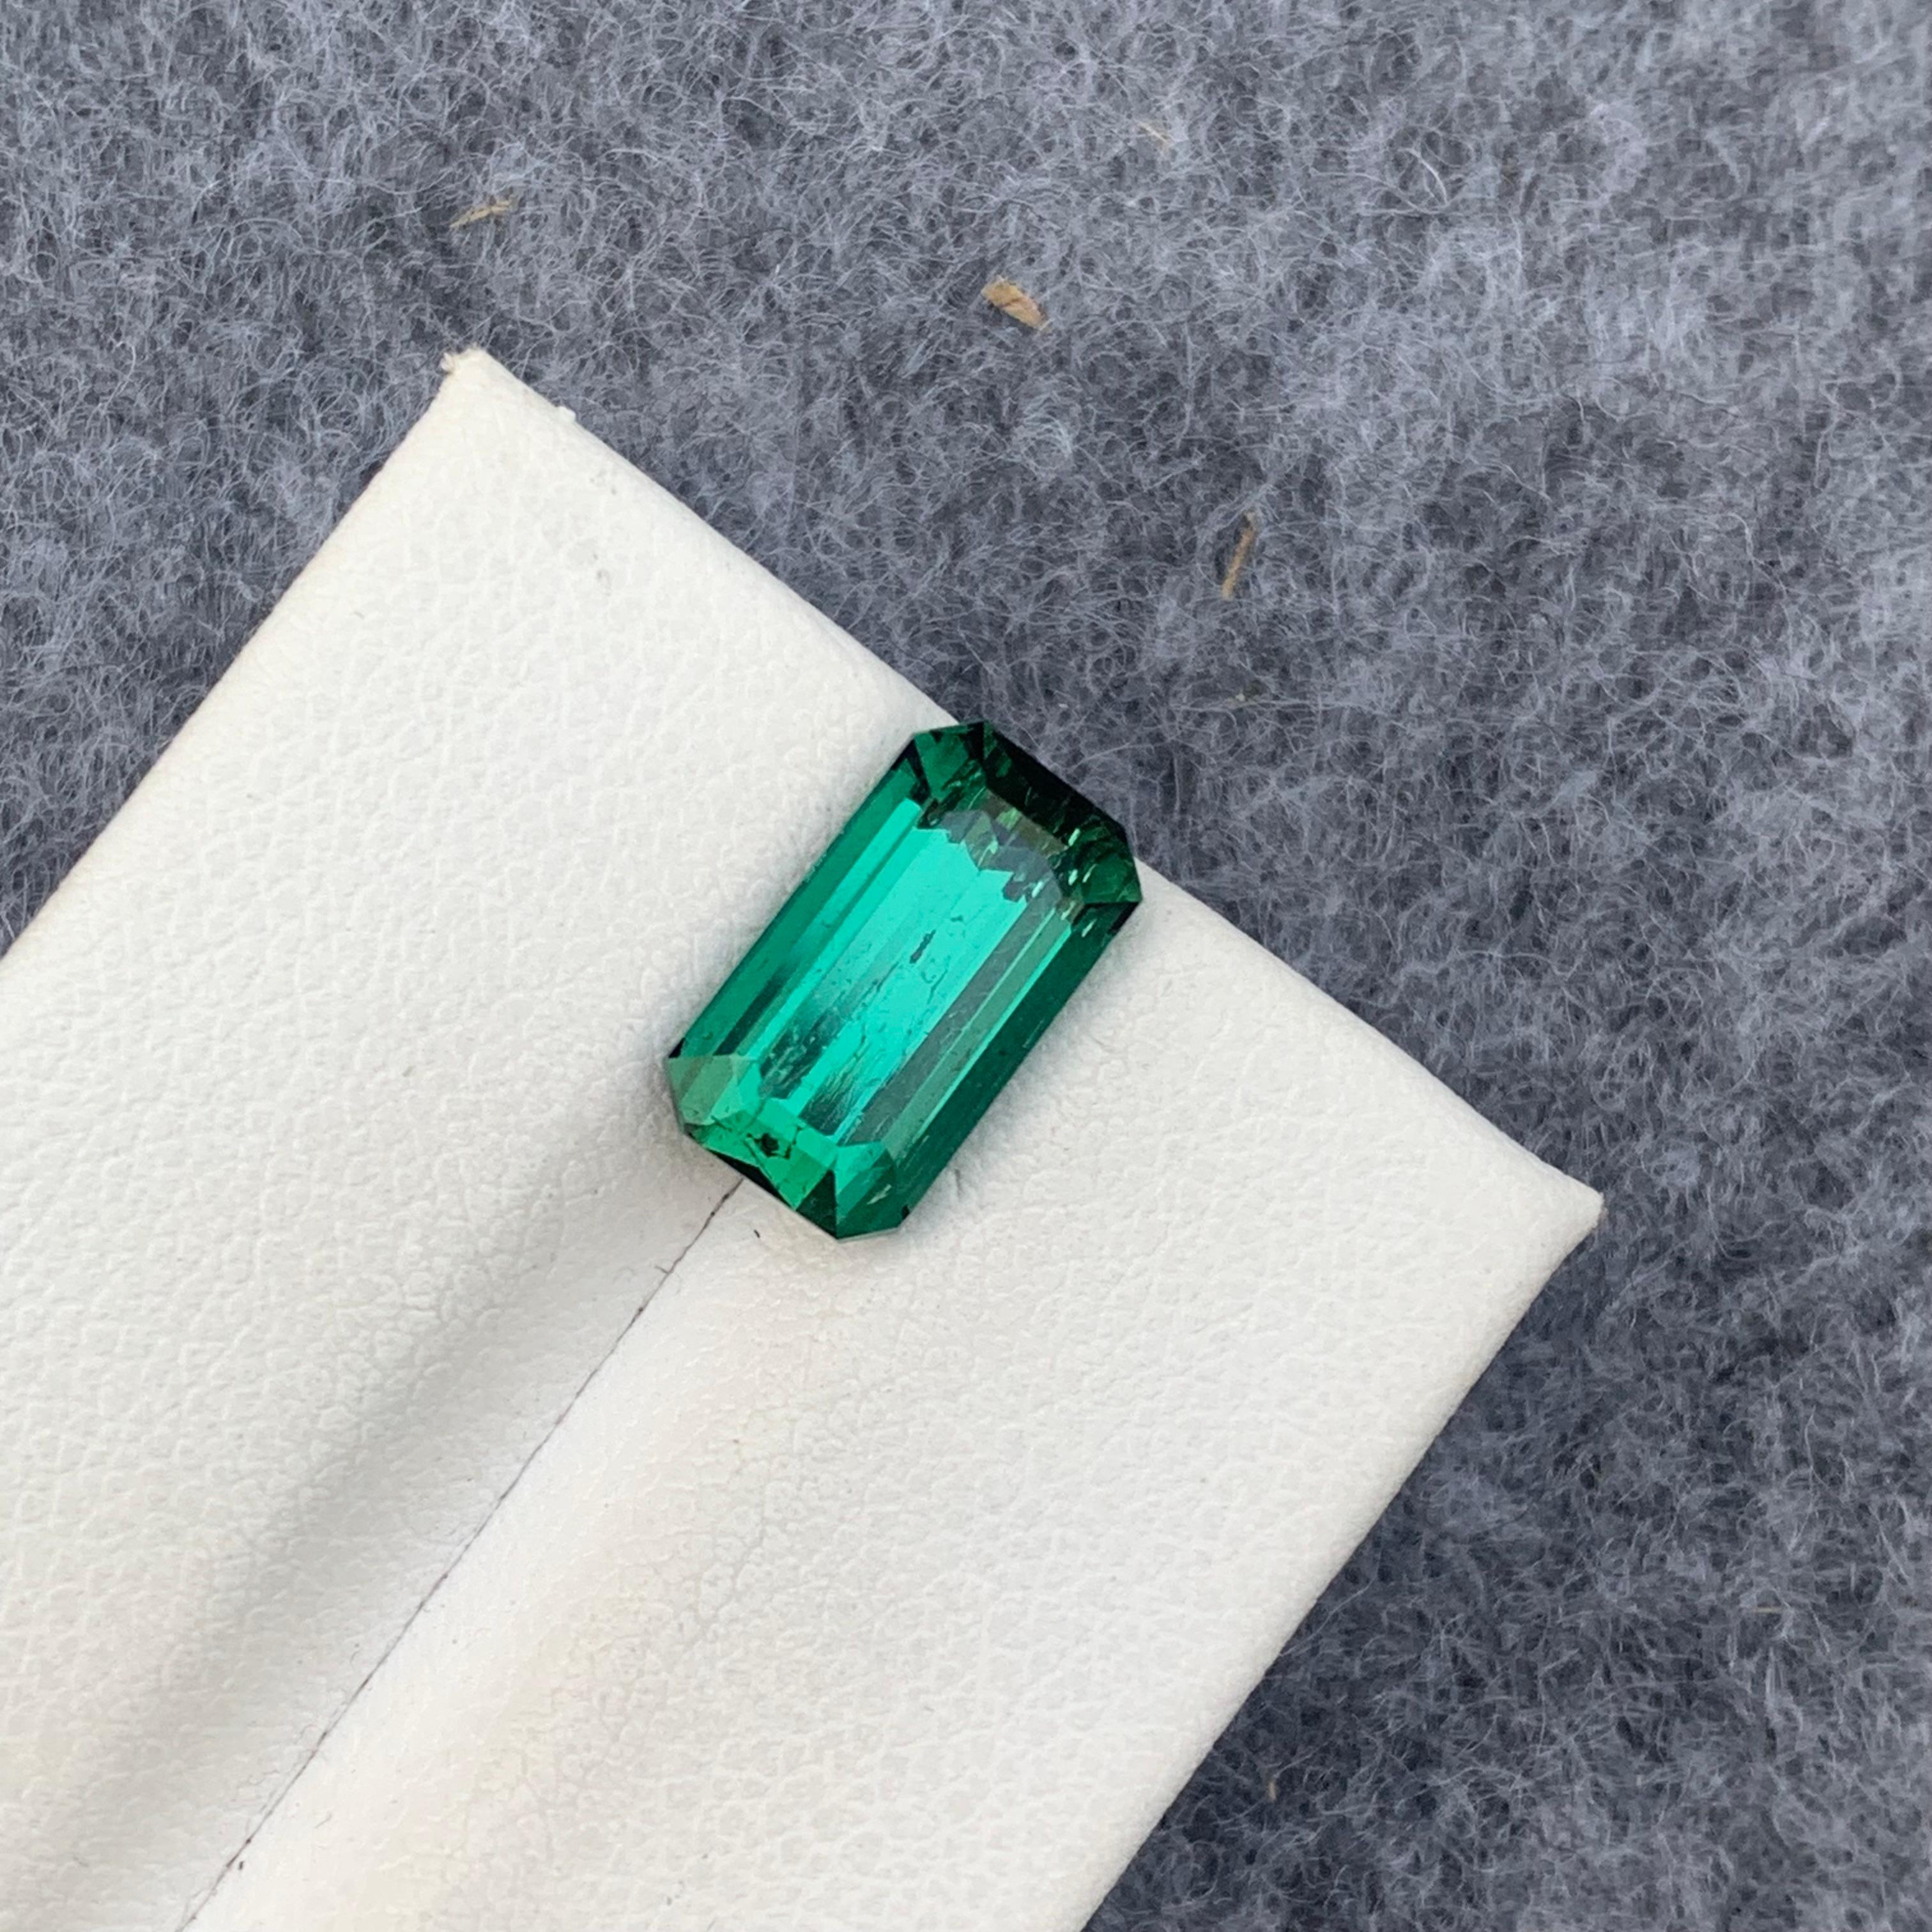 Gemstone Type : Tourmaline
Weight : 3.70 Carats
Dimensions : 11.5x6.5x5.6 Mm
Origin : Kunar Afghanistan
Clarity : SI
Shape: Emerald
Color: Lagoon Green
Certificate: On Demand
Basically, mint tourmalines are tourmalines with pastel hues of light